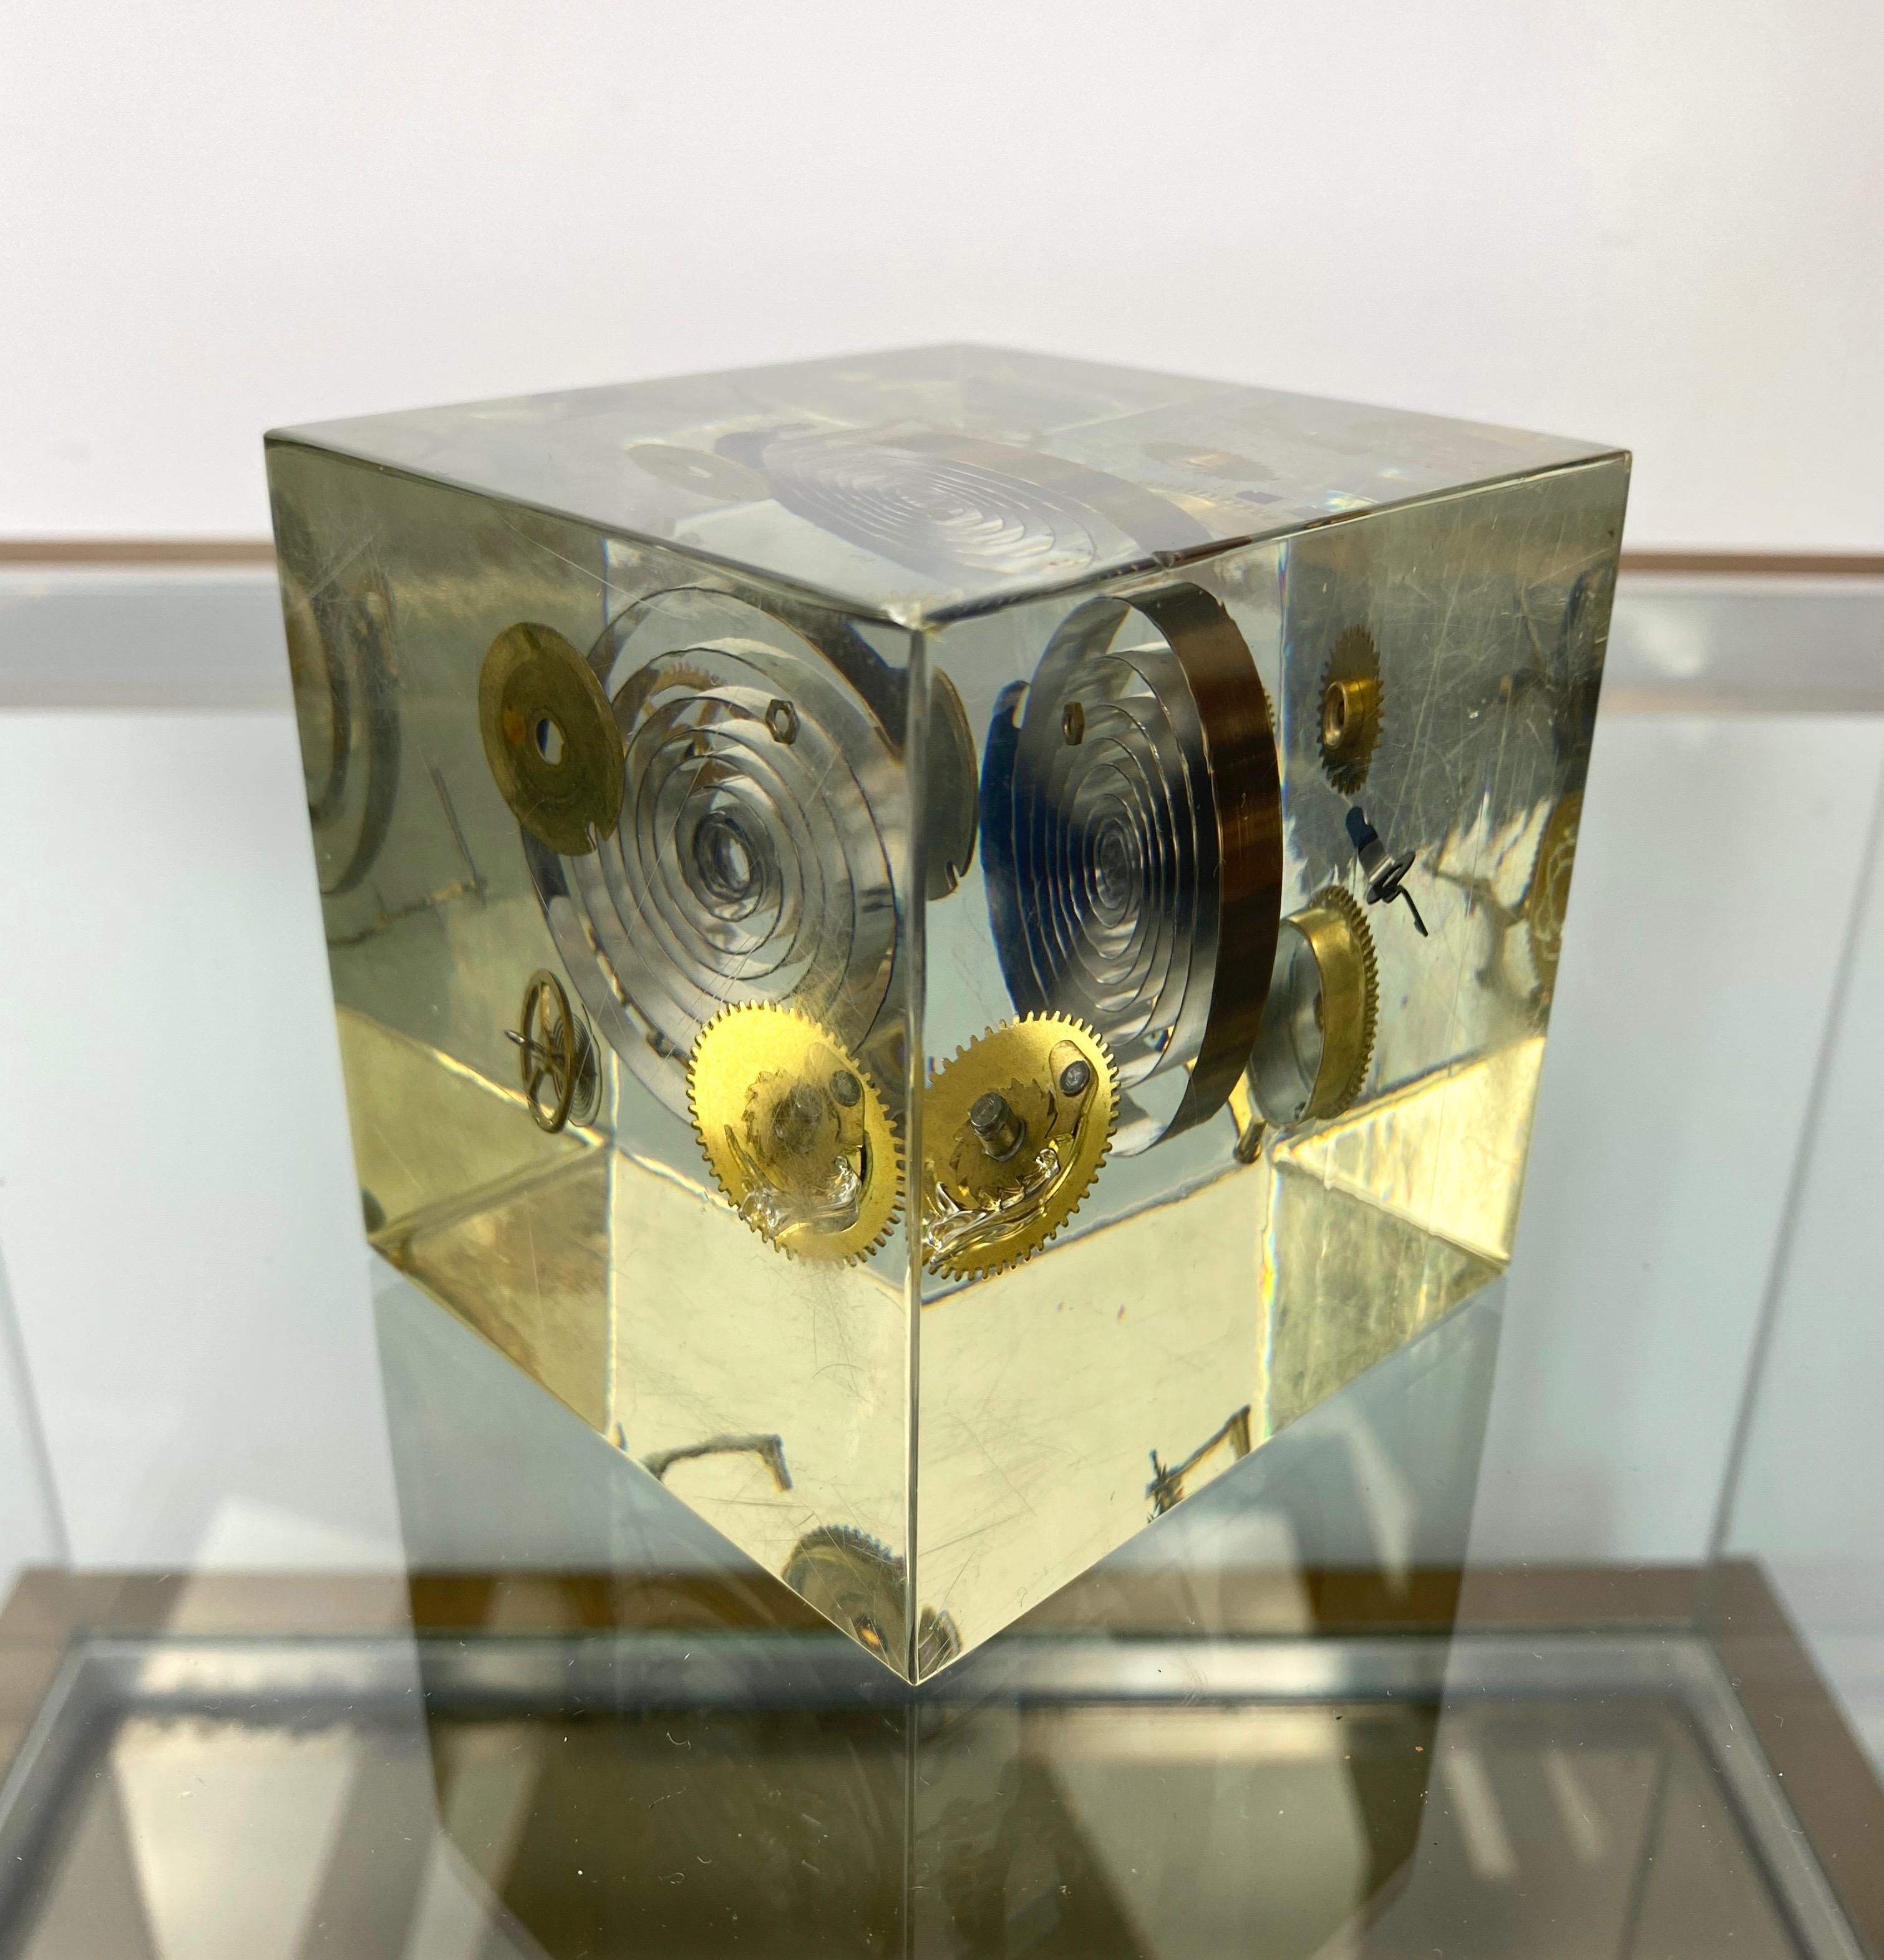 Late 20th Century Acrylic Cube Sculpture Paperweight with Clock Parts by Pierre Giraudon, 1970s For Sale